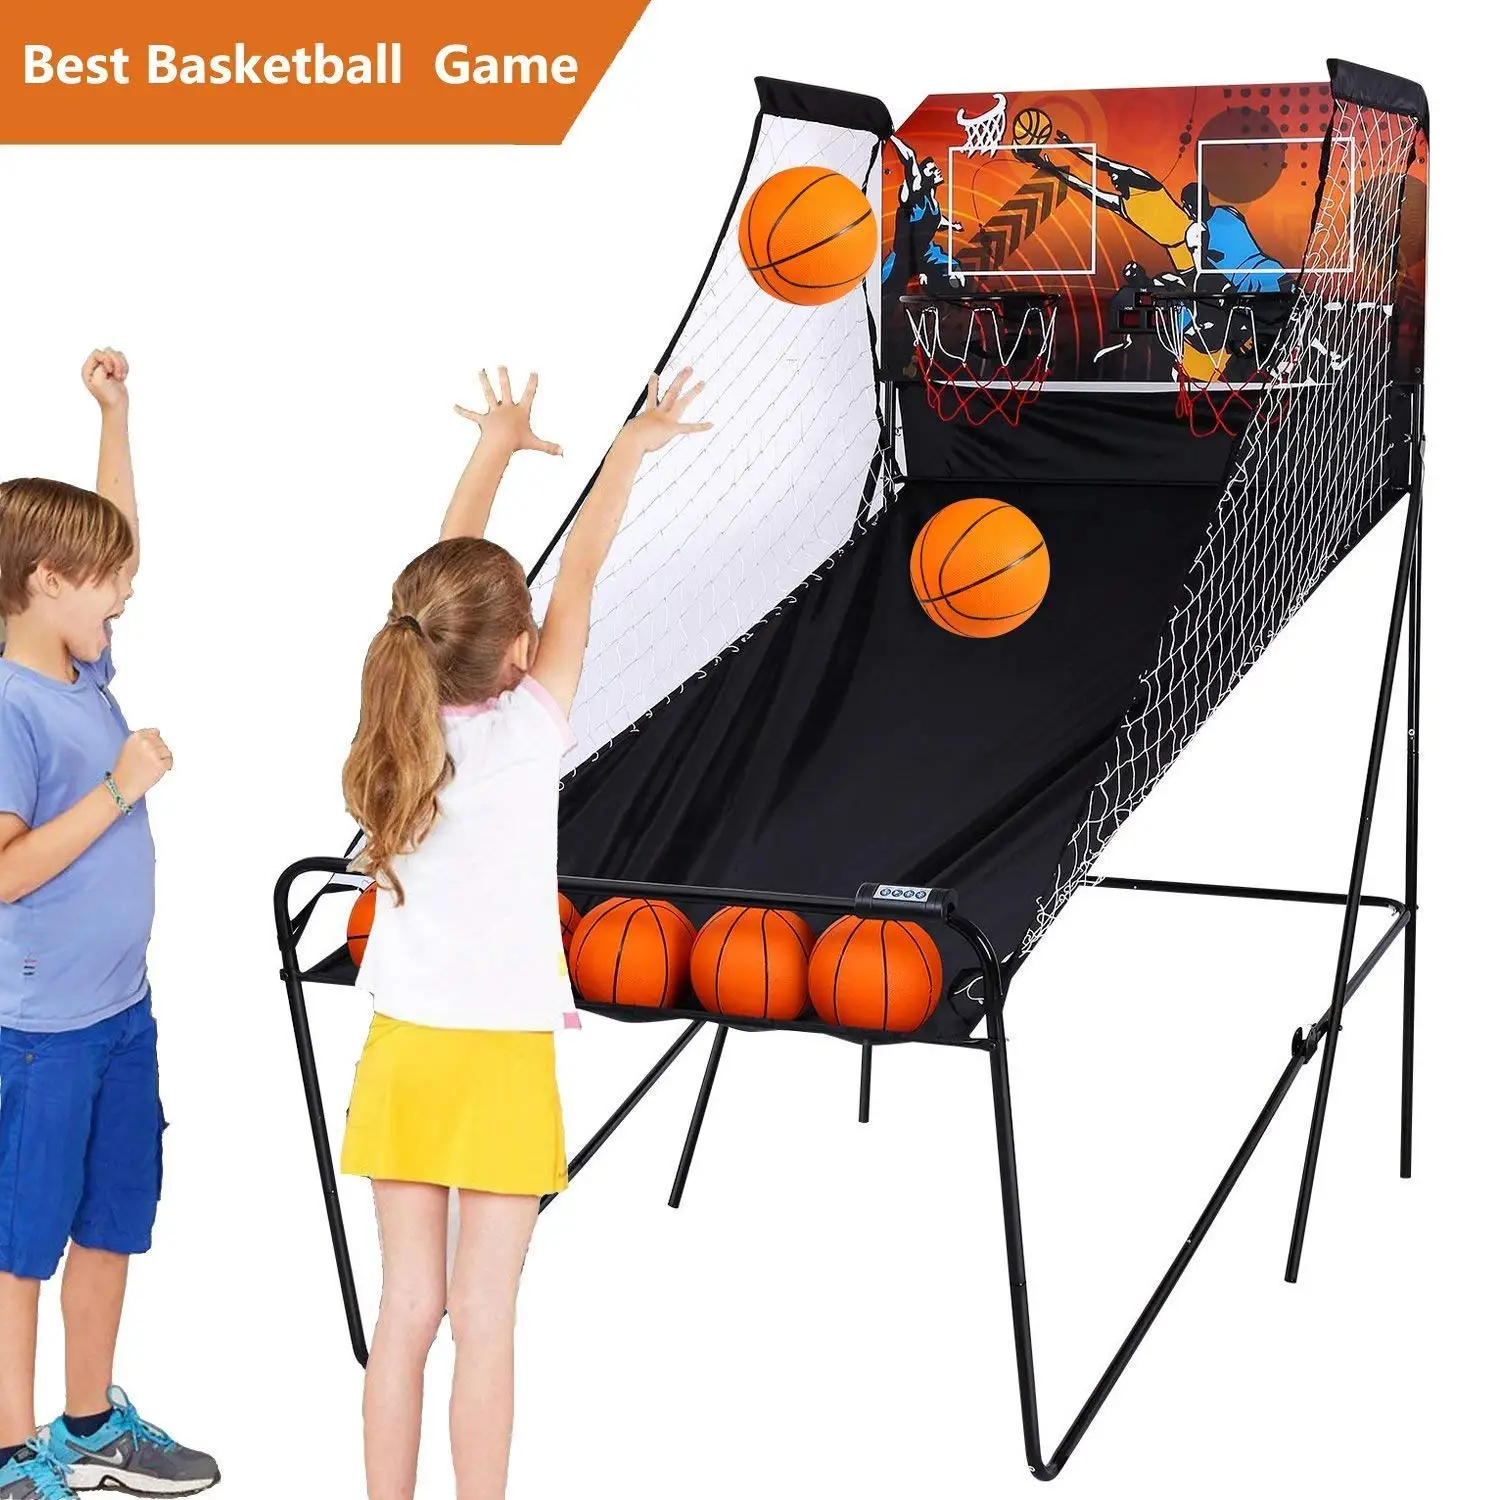 best electronic basketball game